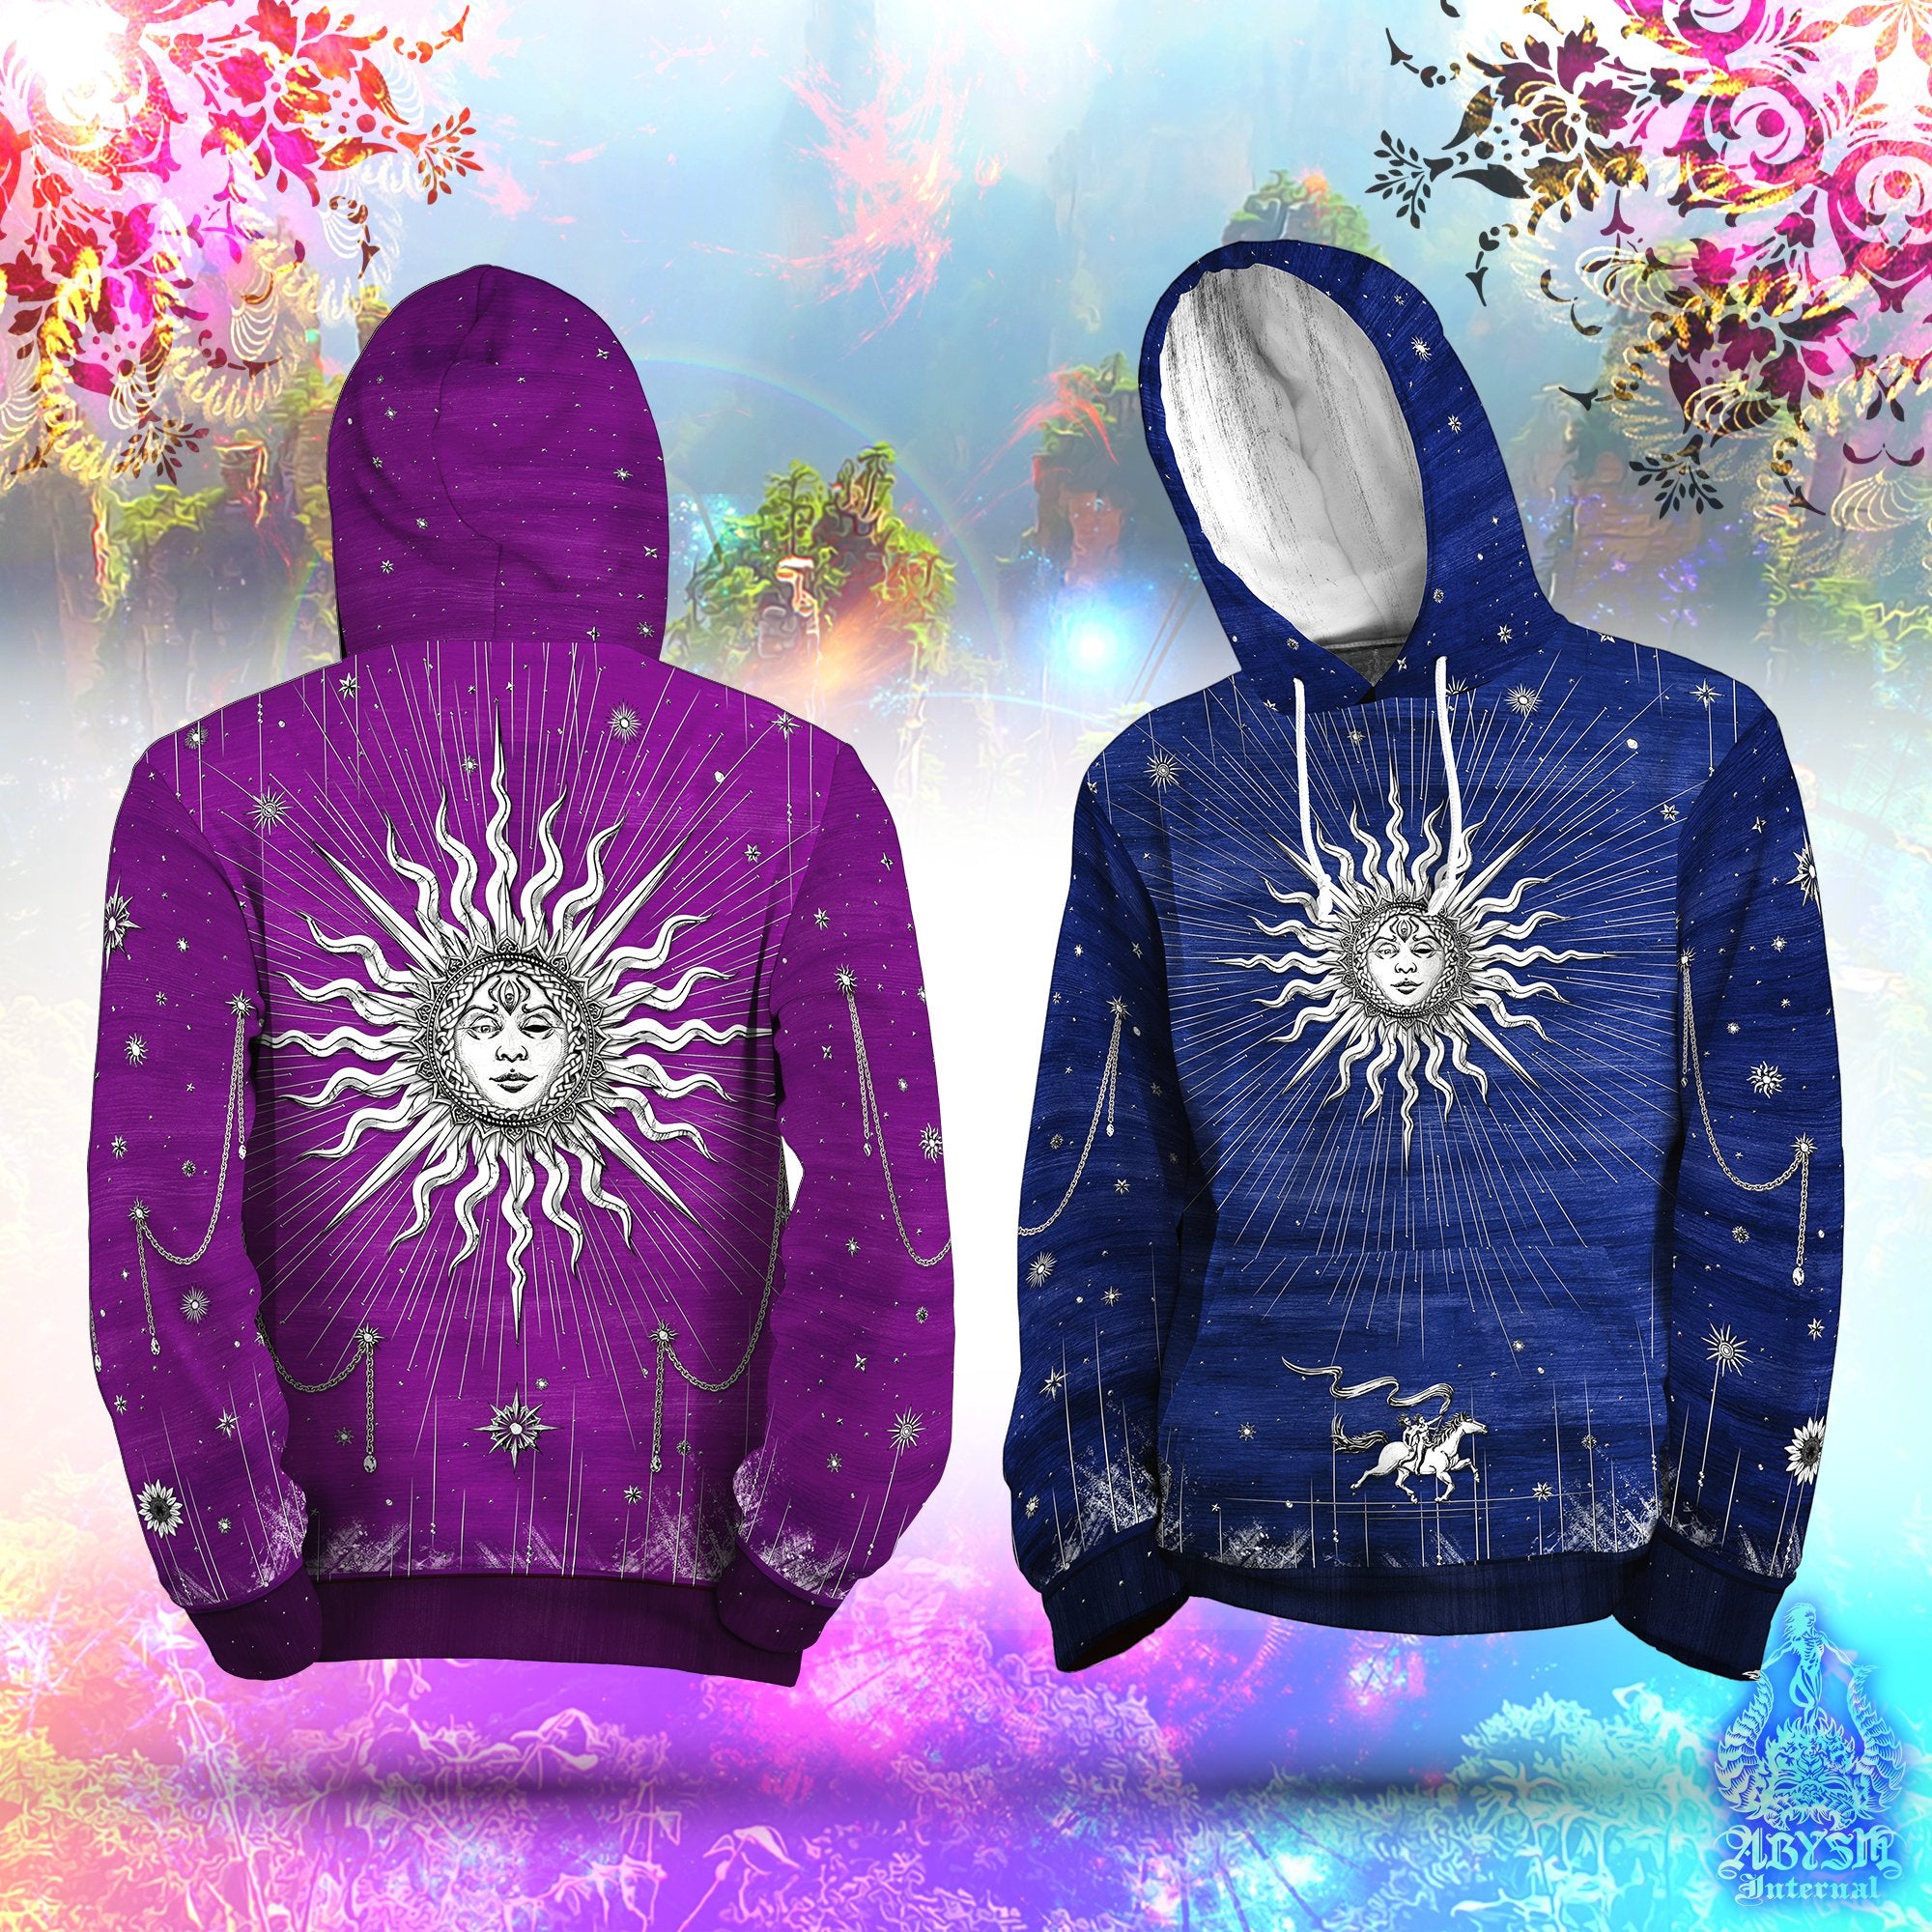 Tarot Sun Hoodie, Magic Arcana Pullover, Indie Sweater, Esoteric Street Outfit, Positive Streetwear, Boho Clothing, Unisex - White and 6 Colors - Abysm Internal